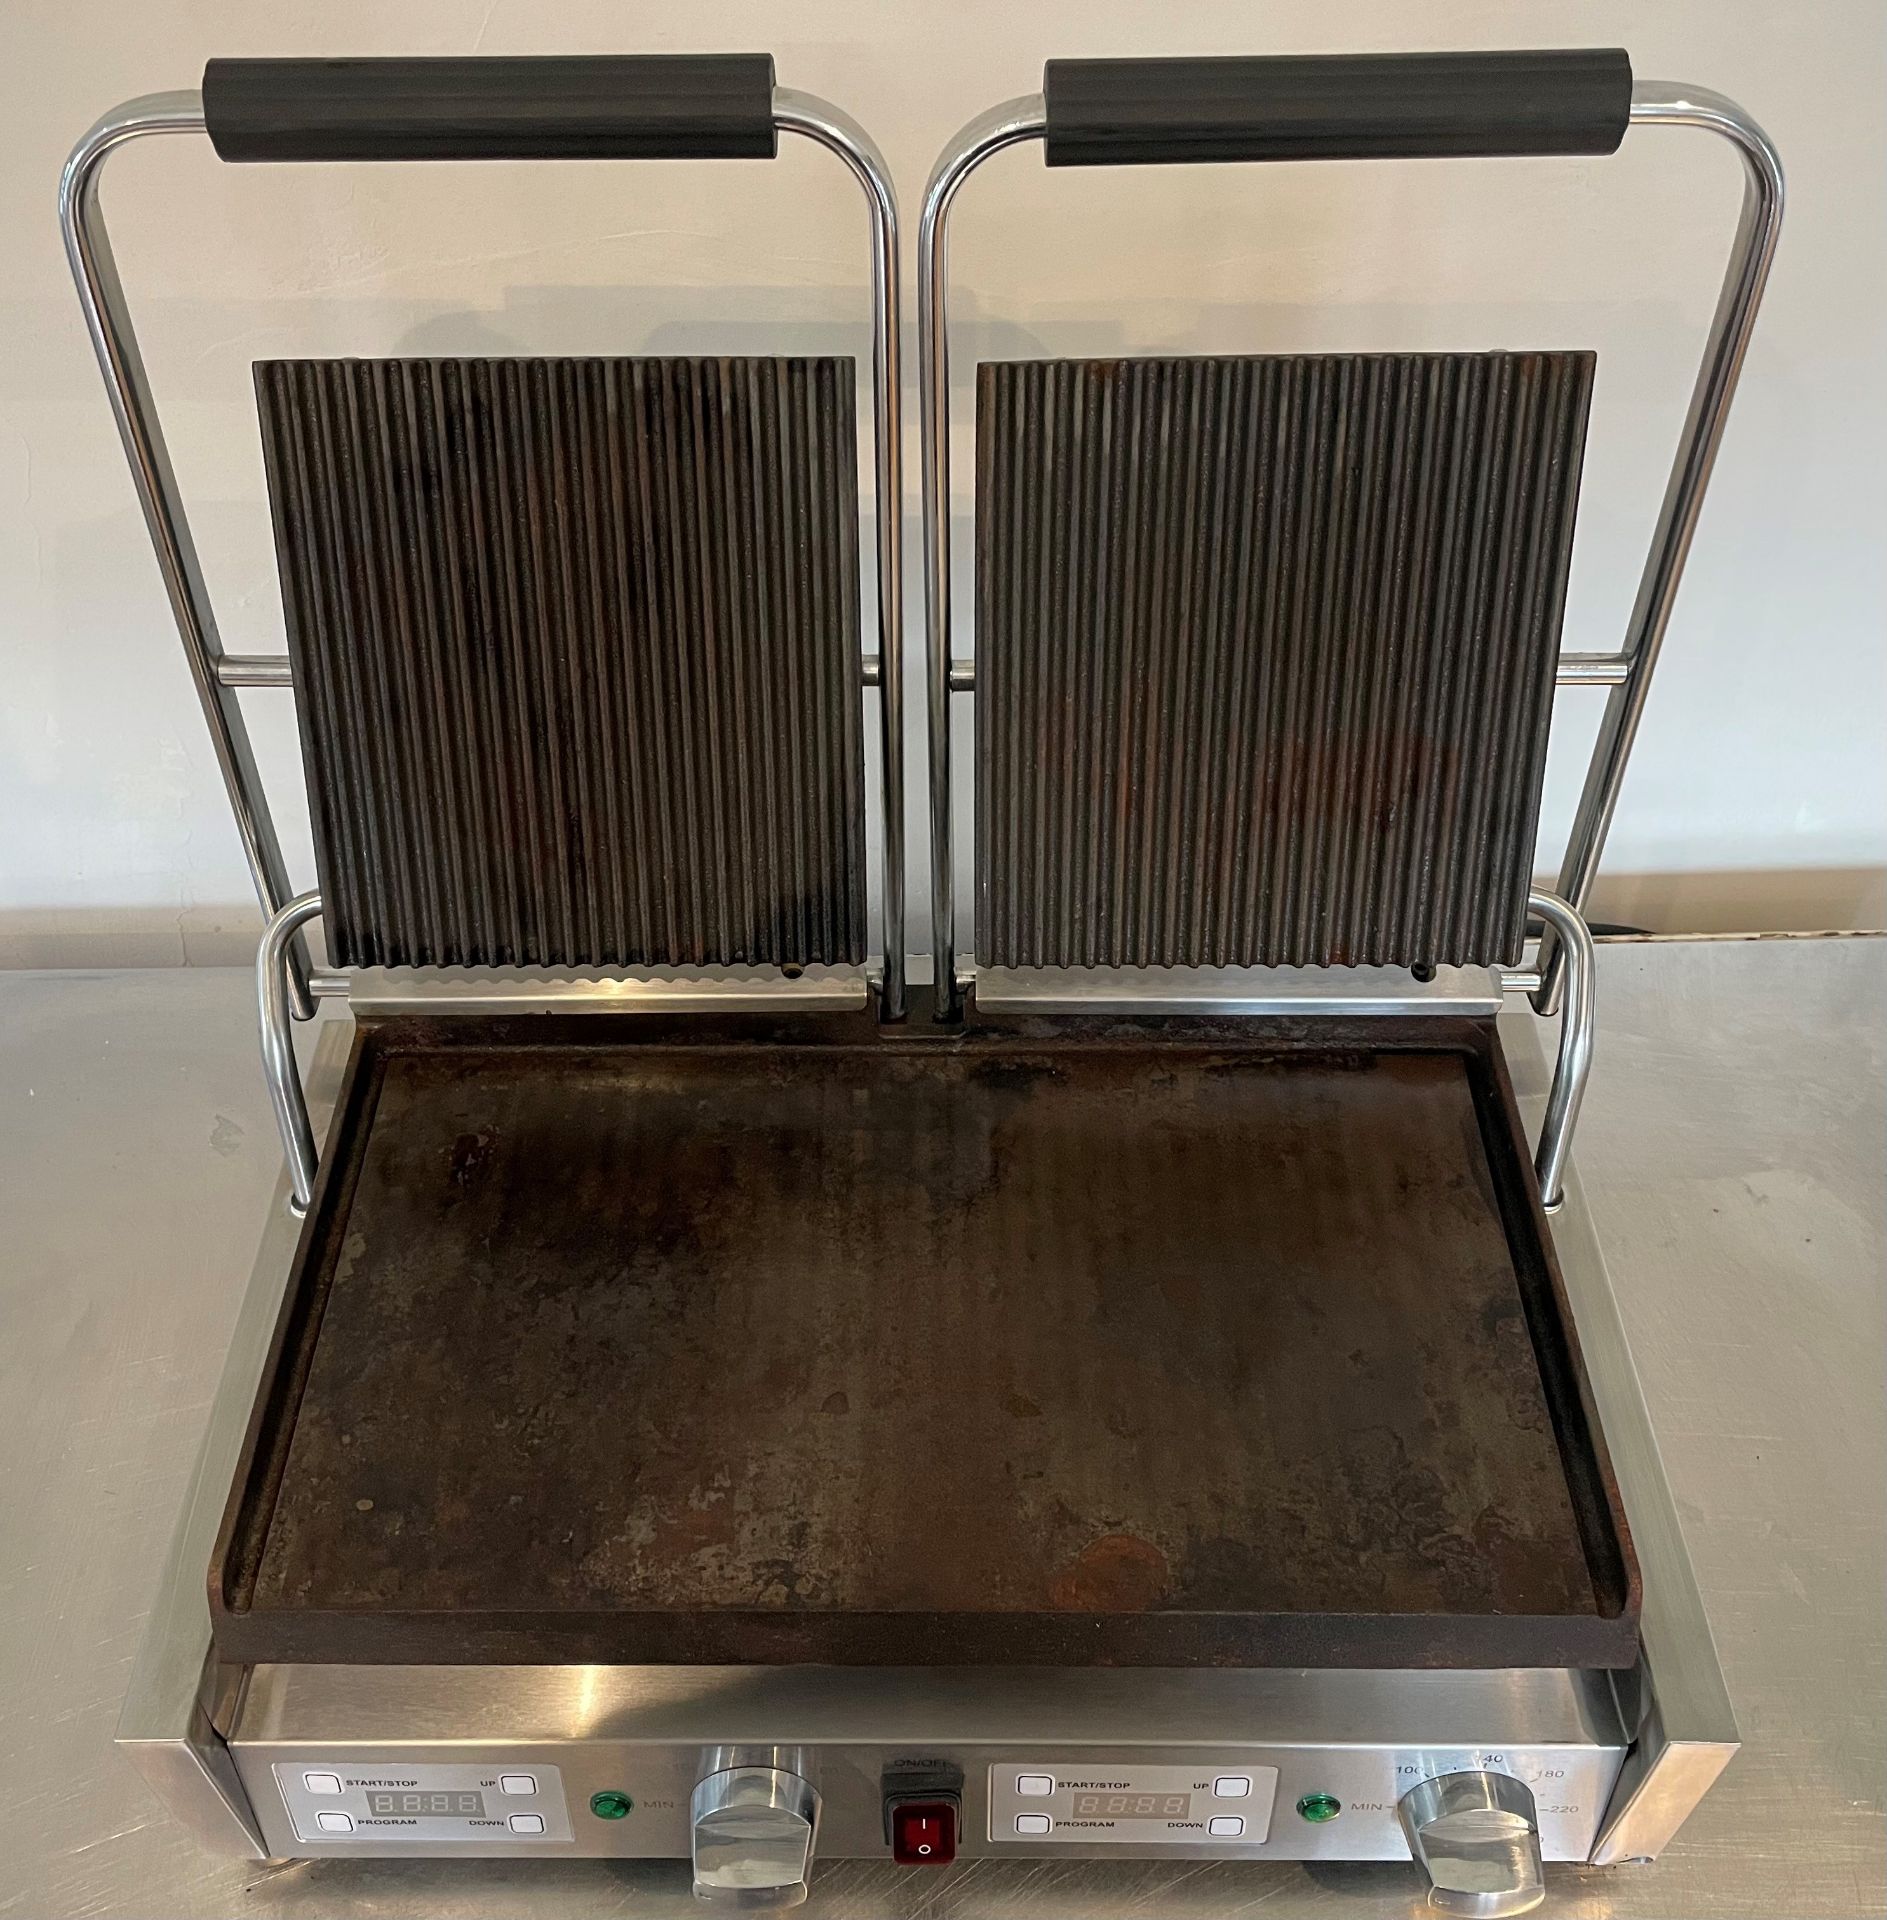 Buffalo FC385-02 Double Ribbed Top Contact Grill. Dimensions 210(H) x 550(W) x 395(D)mm. - Image 2 of 8